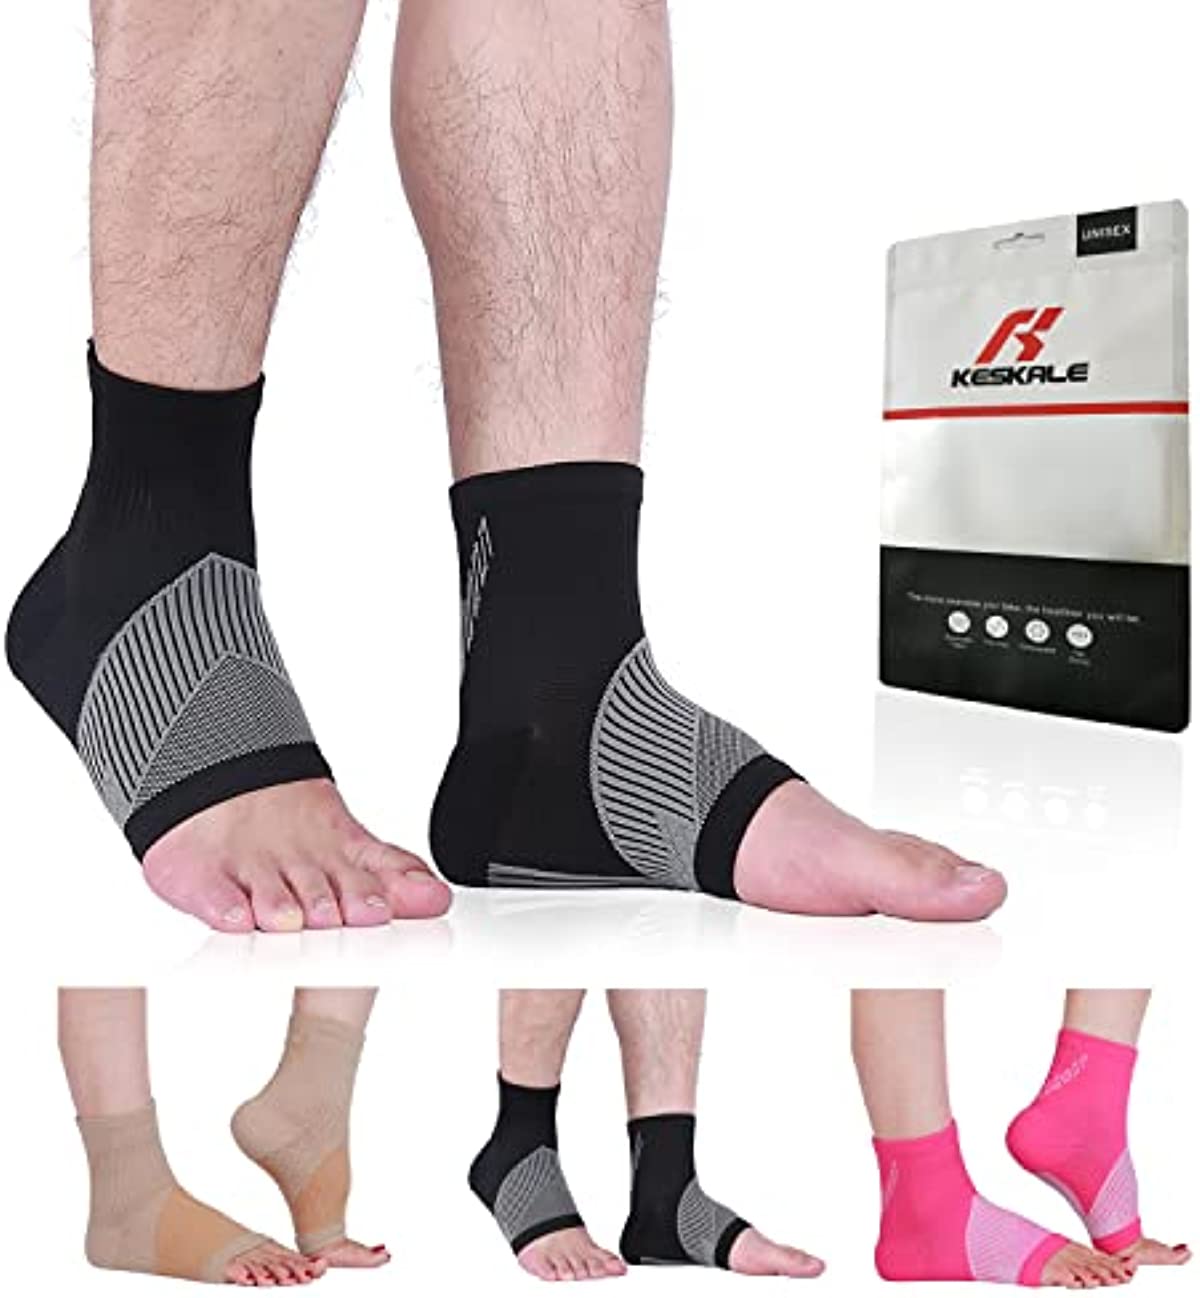 Ankle Compression Sleeve for Women Men (3 pairs), Ankle Support Brace Compression Socks for Plantar Fasciitis Swelling Pain Relief, Black x 3pairs, Small